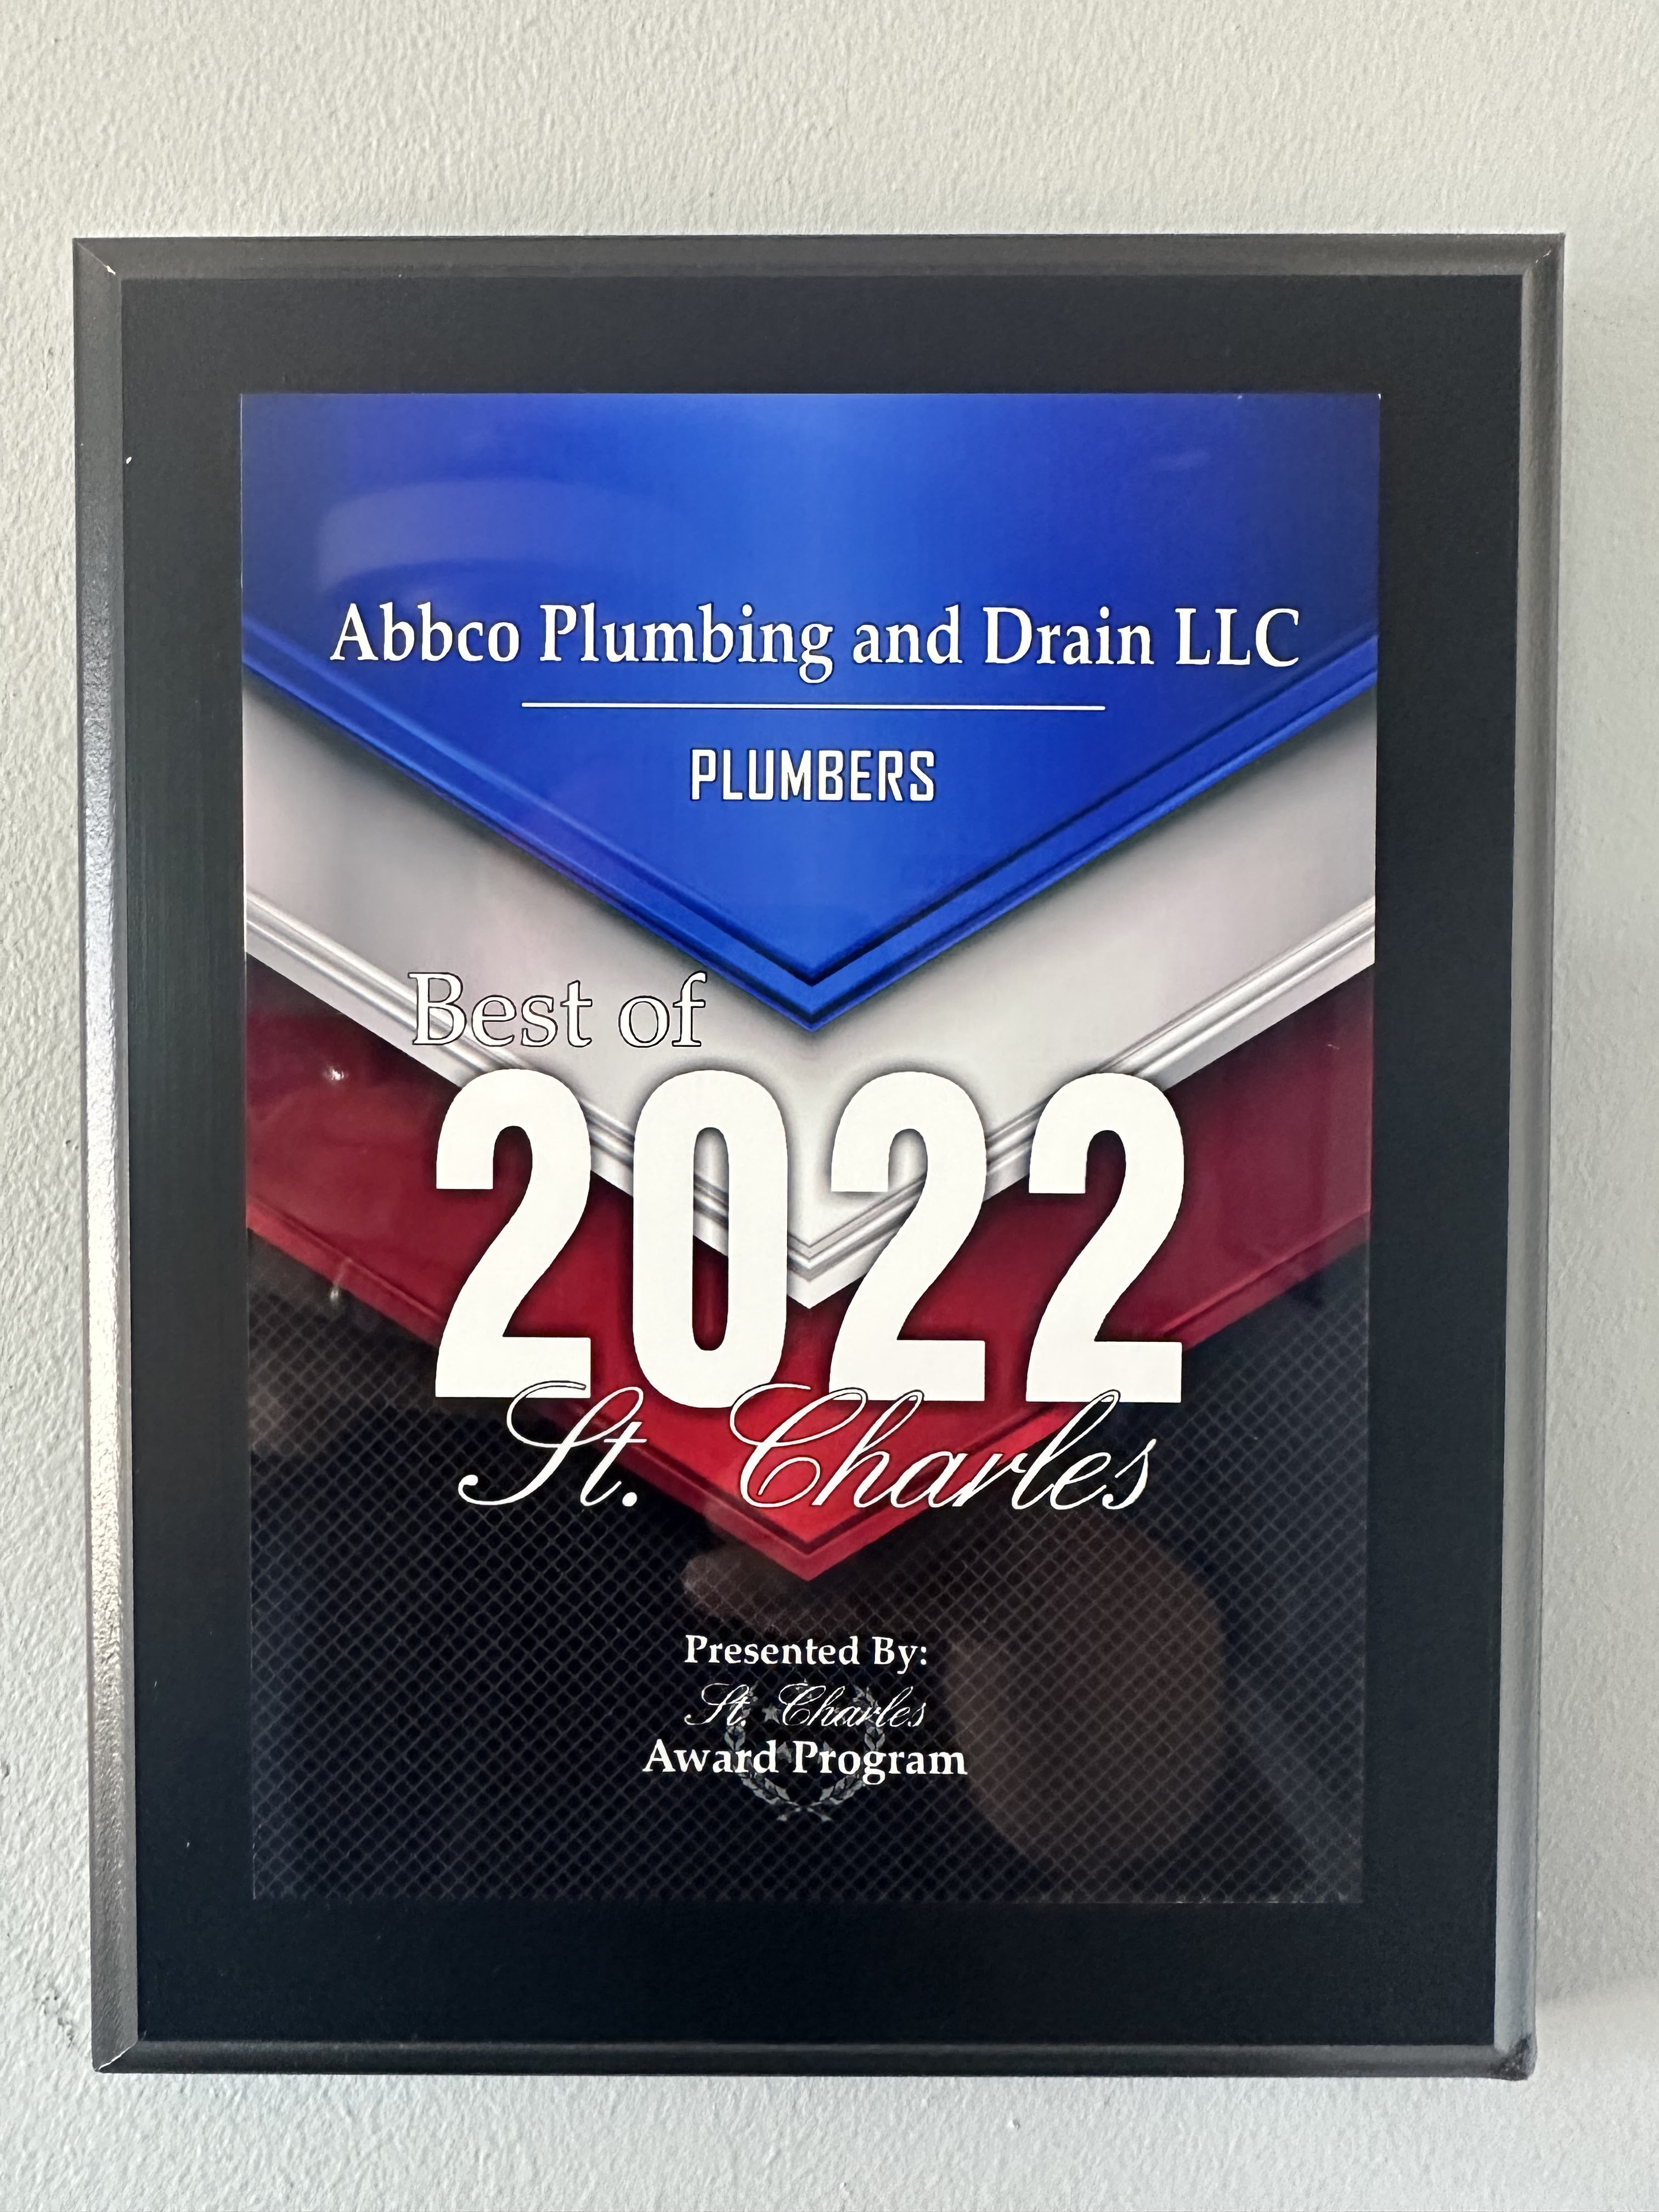 Scheduled Plumbing Services, St. Charles, MO  